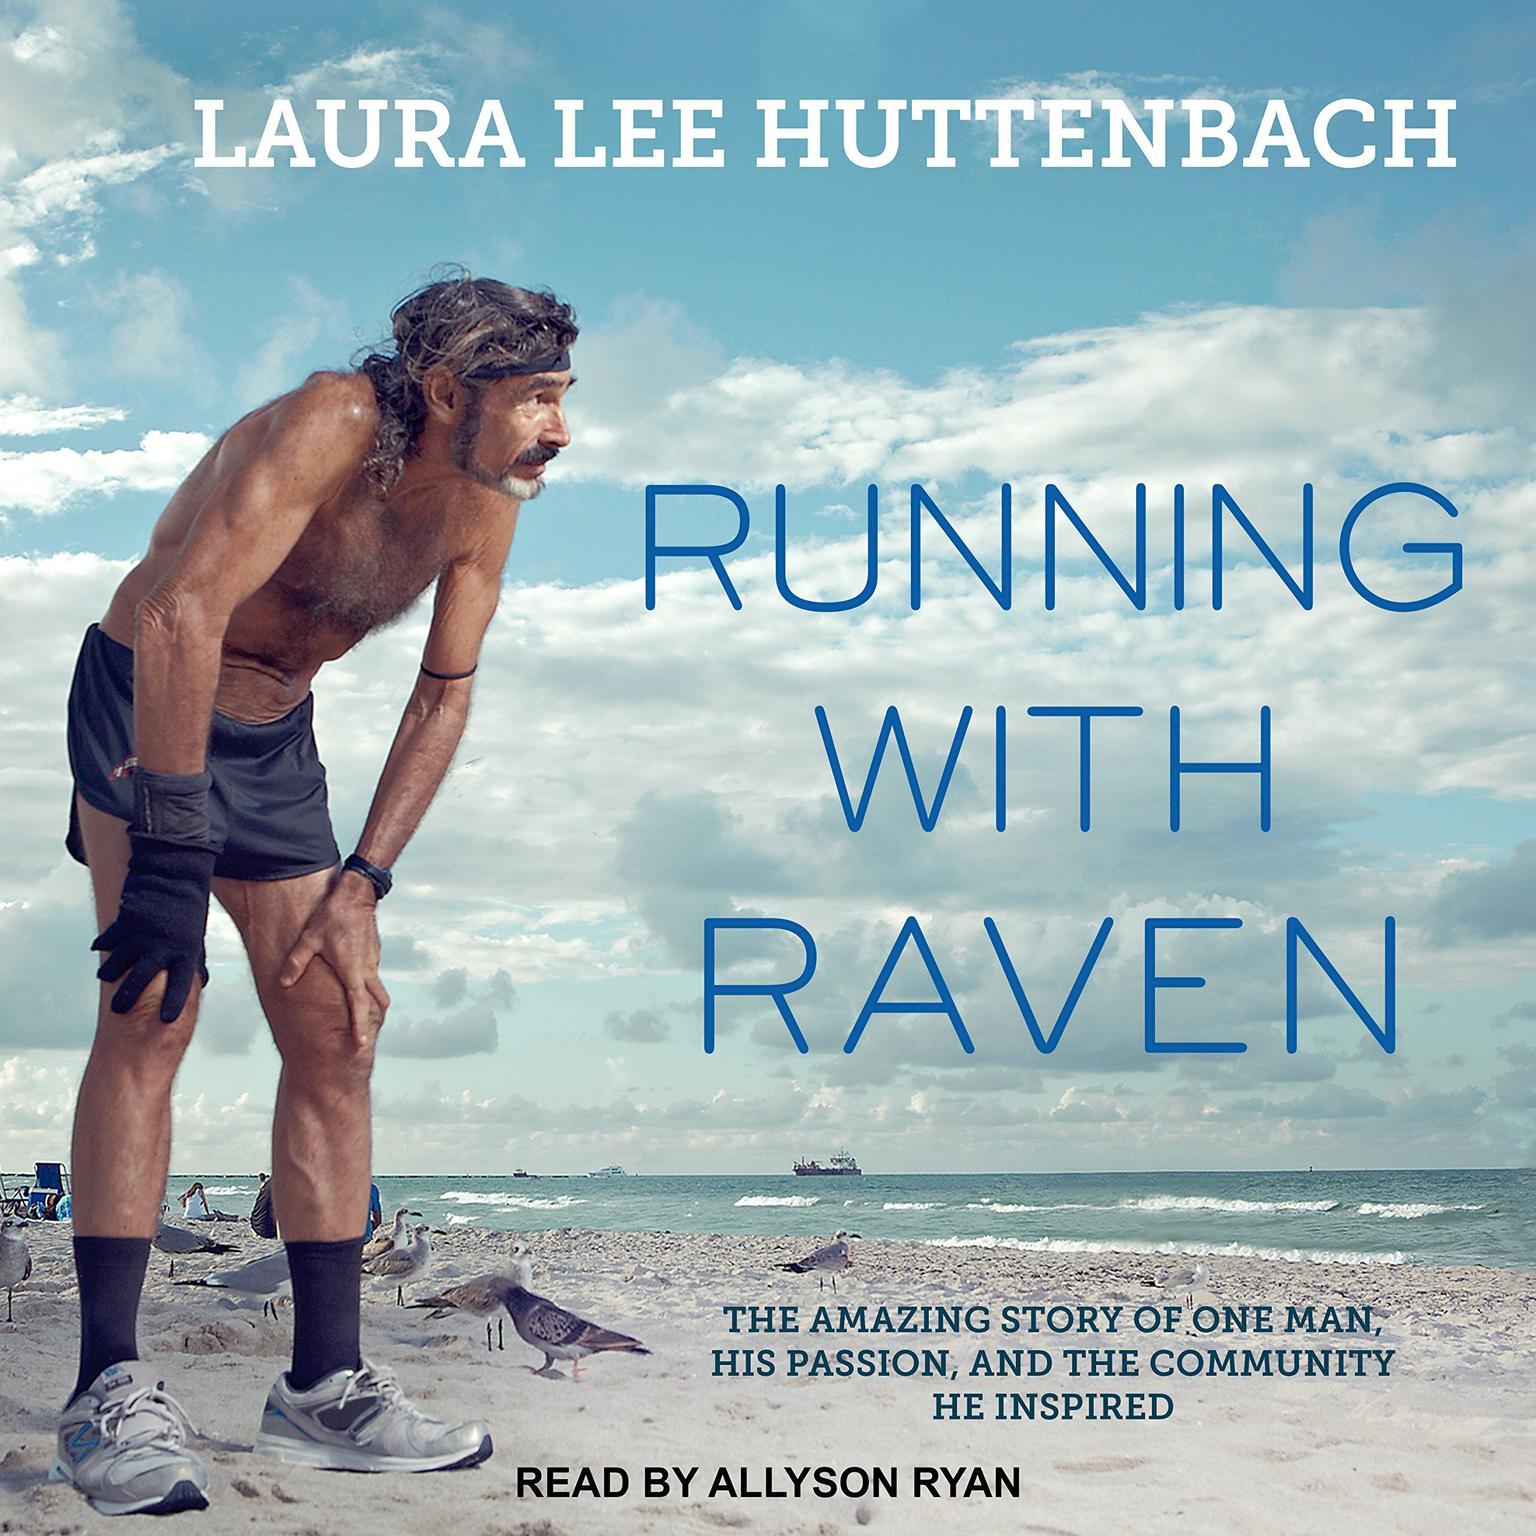 Running with Raven: The Amazing Story of One Man, His Passion, and the Community He Inspired Audiobook, by Laura Lee Huttenbach